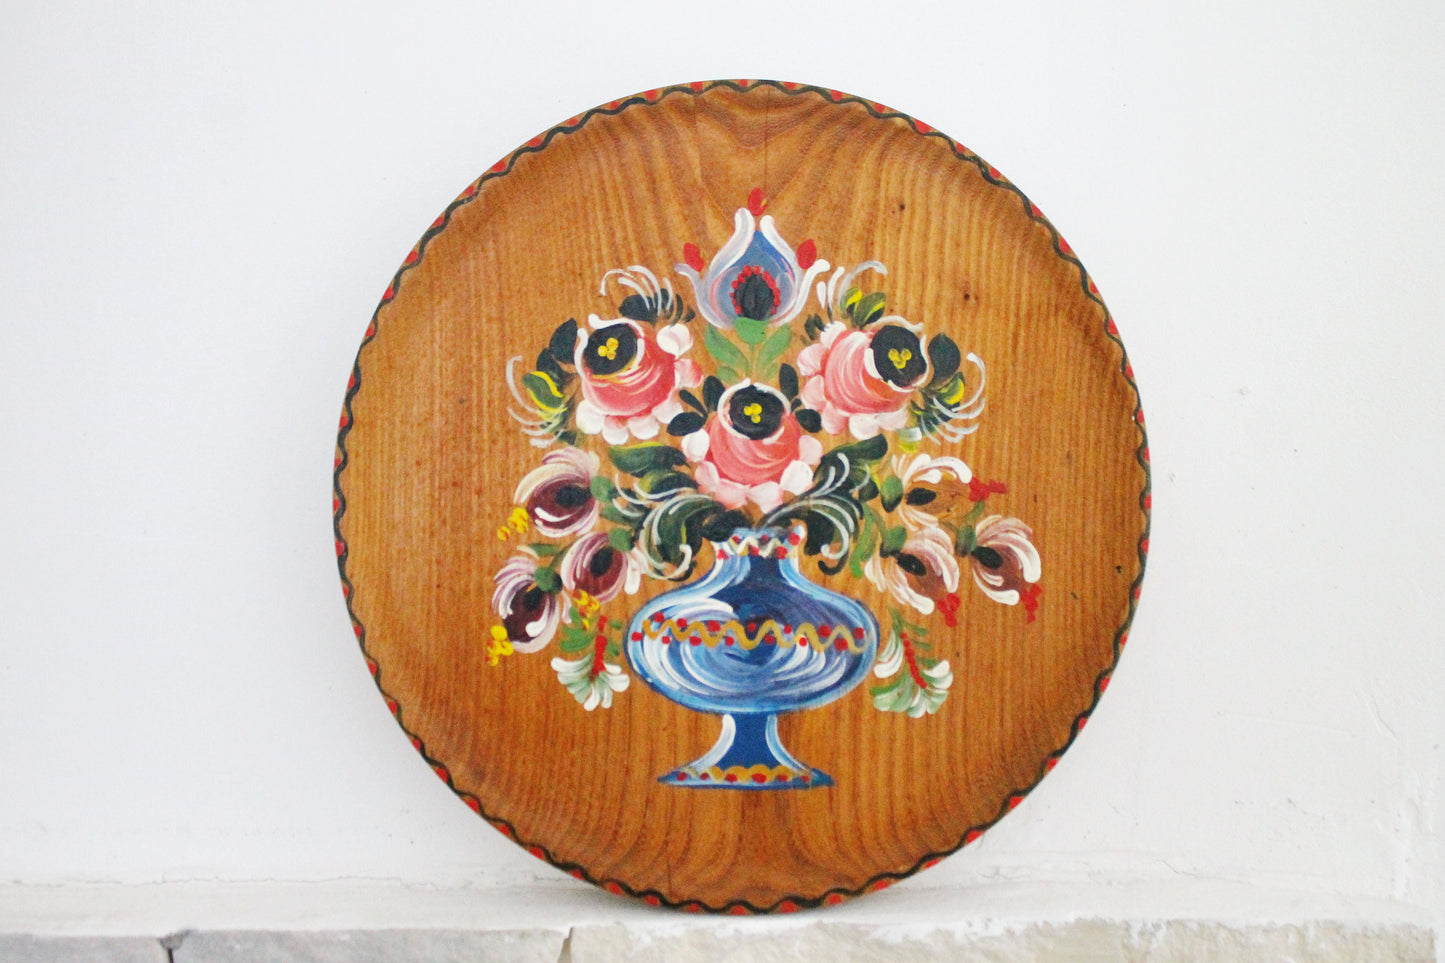 Vintage decorative wooden wall plate 29 cm - 11.4 inches. Made in Germany - vintage plate - vintage wall plate - 1980